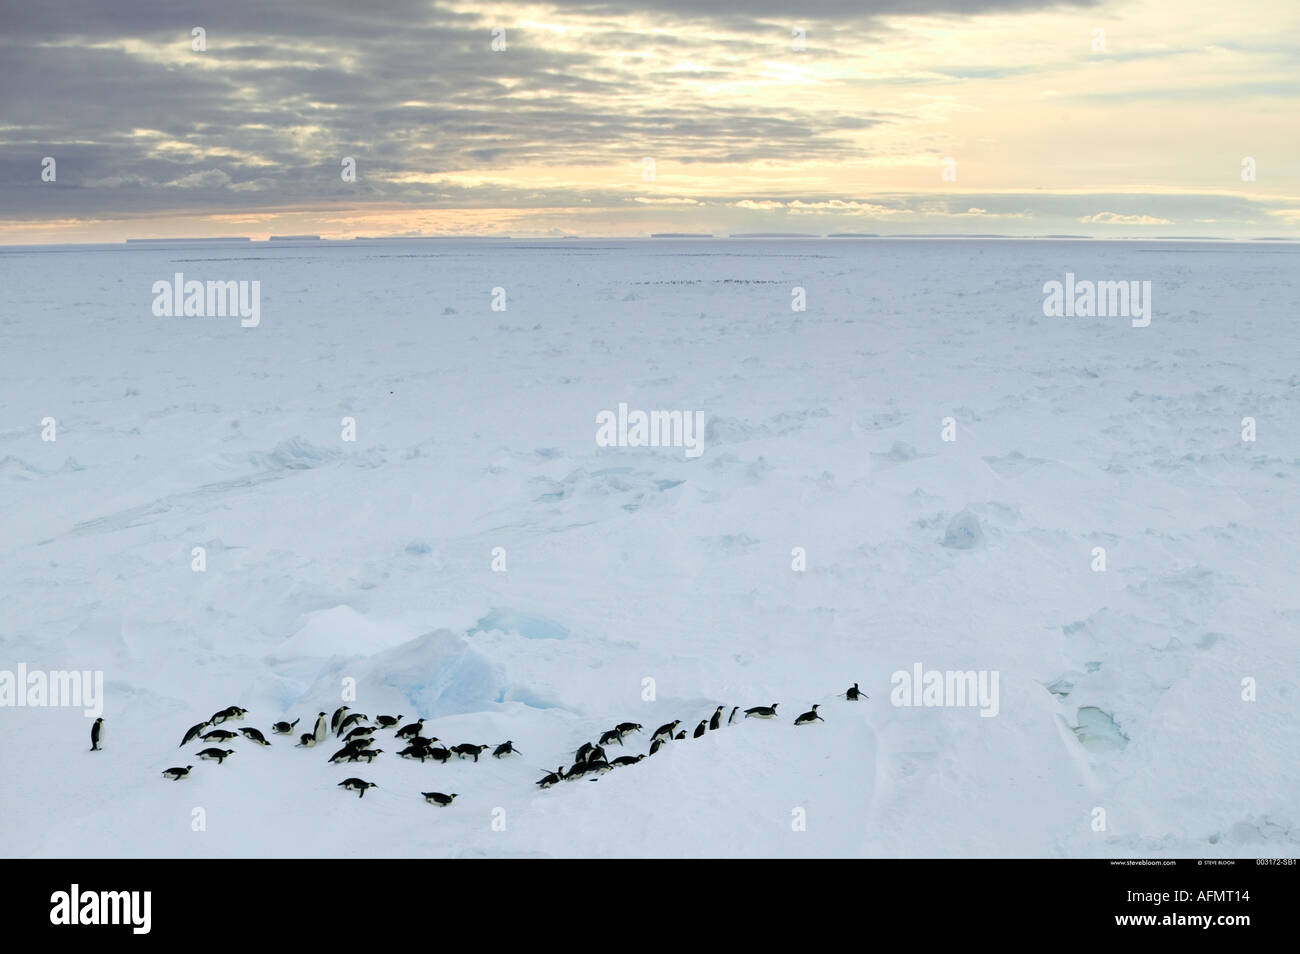 Emperor penguins on their way back to the colony Coulman Island Antarctica Stock Photo